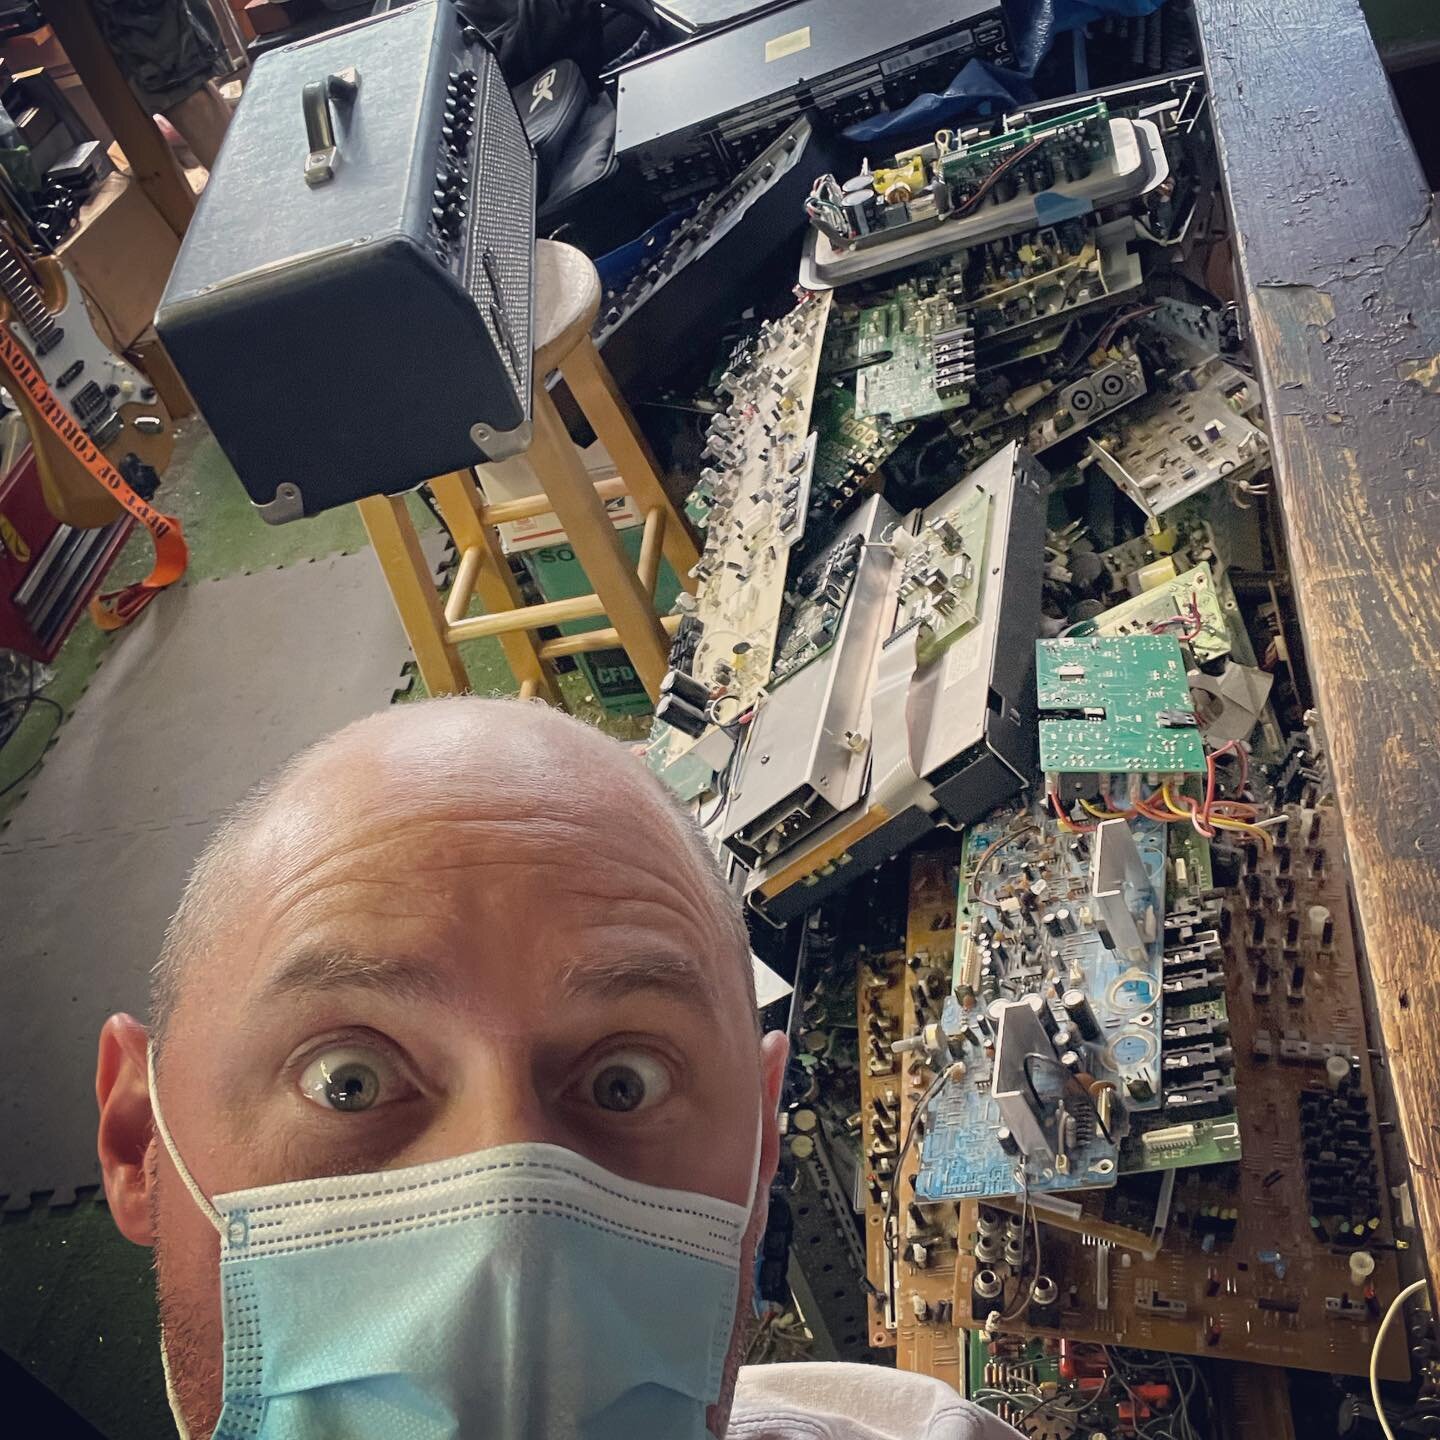 Picking up gear from Musician&rsquo;s Electronic Service for tonight&rsquo;s show at Briar Bush. Love this mad scientist workshop.